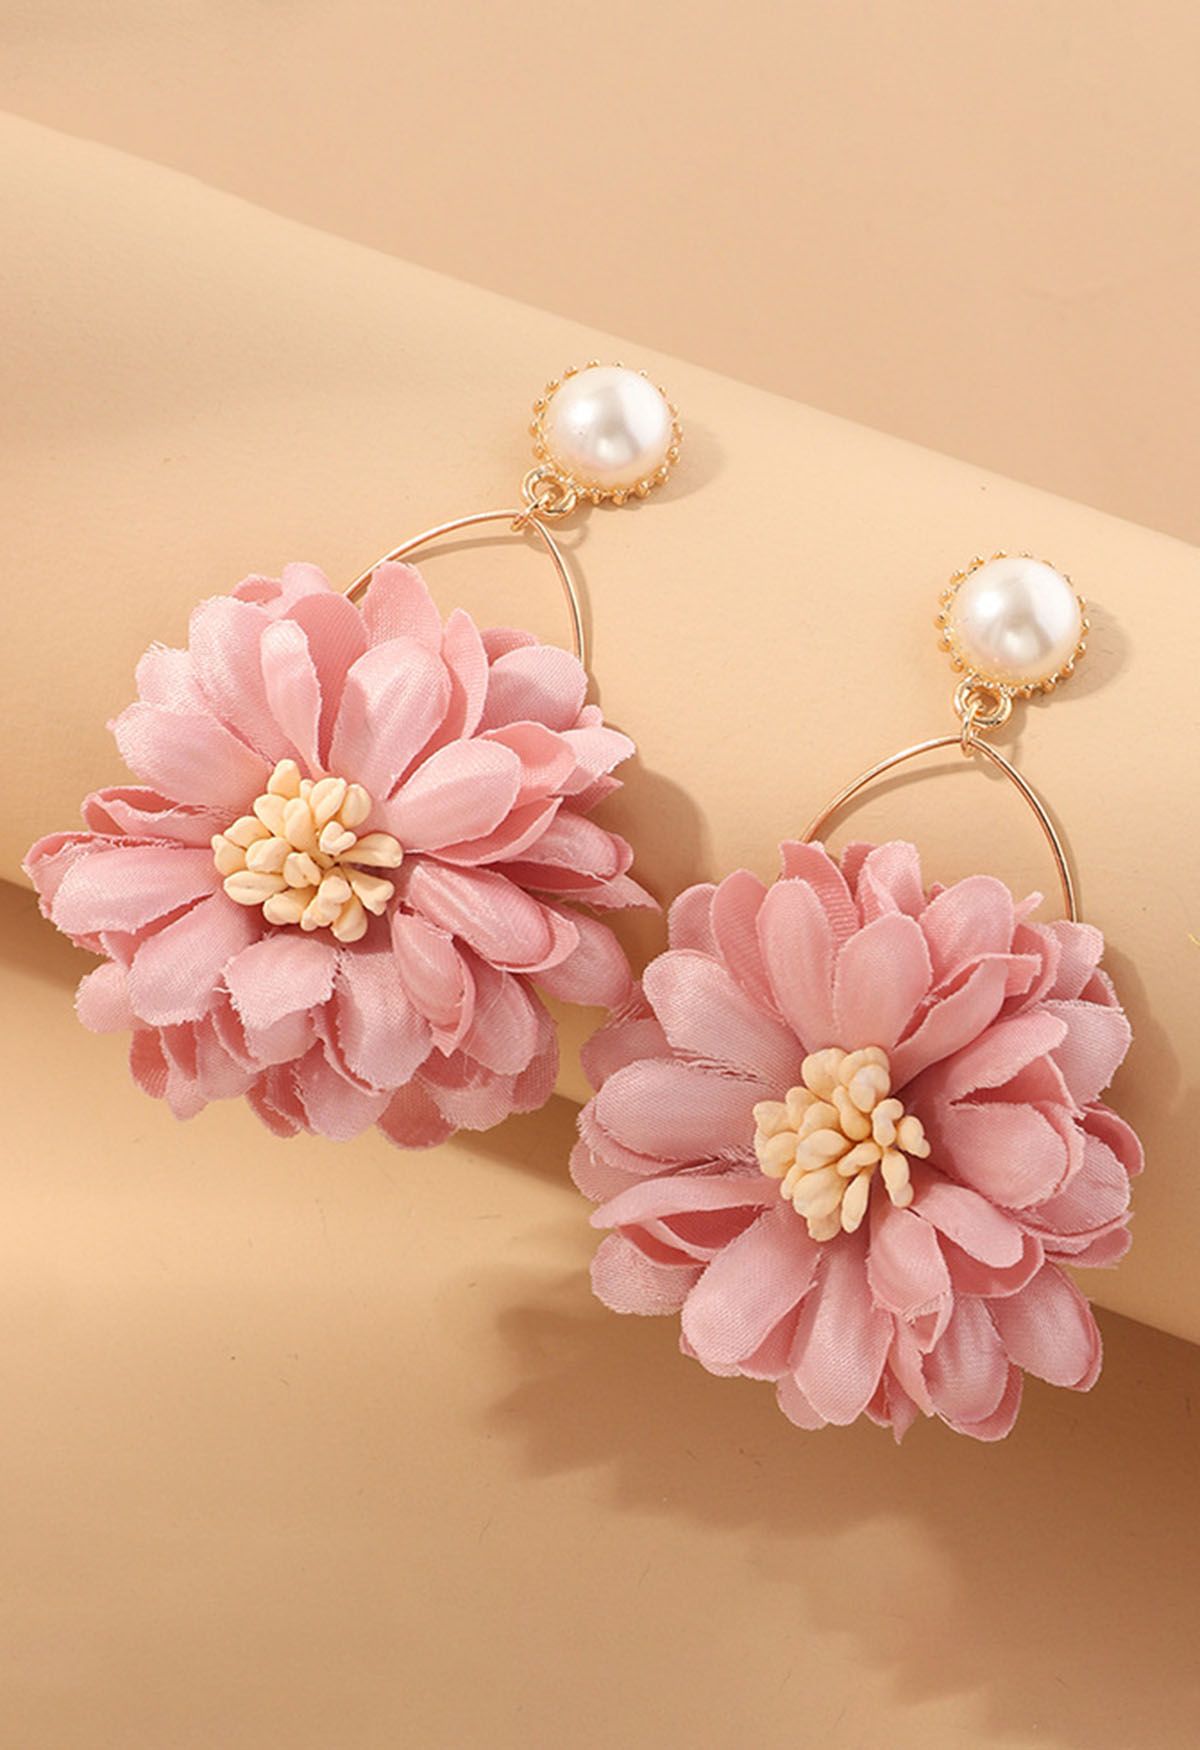 Captivating Blossom Pearl Earrings in Pink